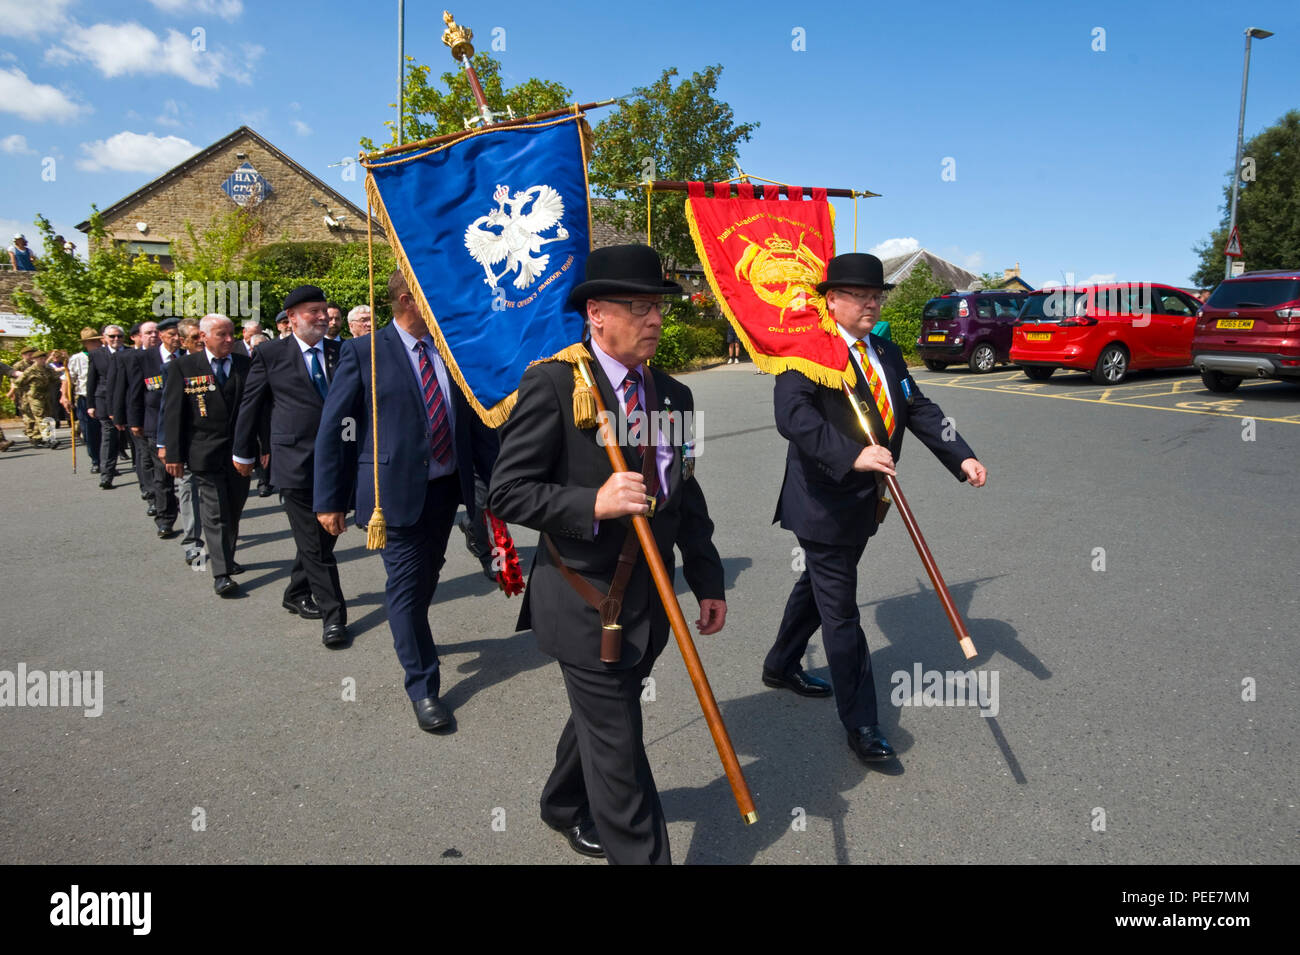 World War One commemorative event parade at Hay-on-Wye Powys Wales UK Stock Photo